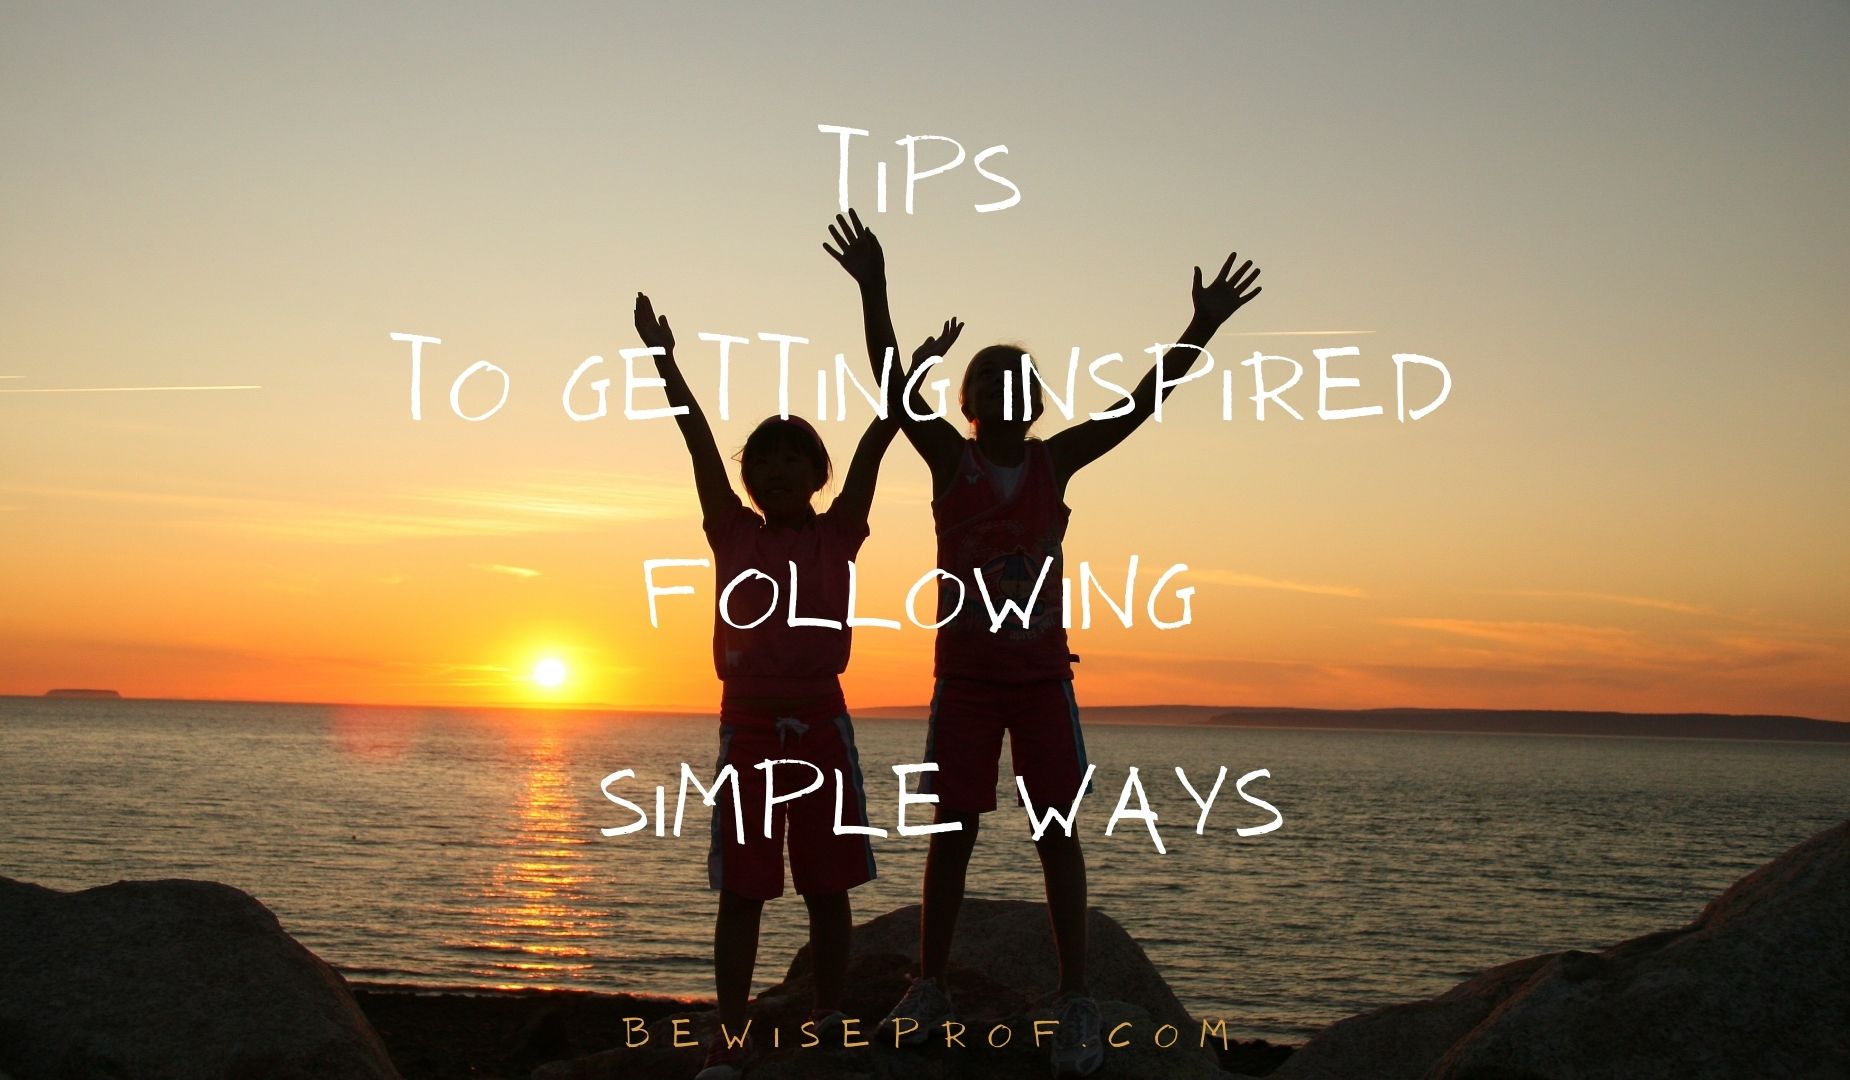 Tips To Getting Inspired Following Simple Ways